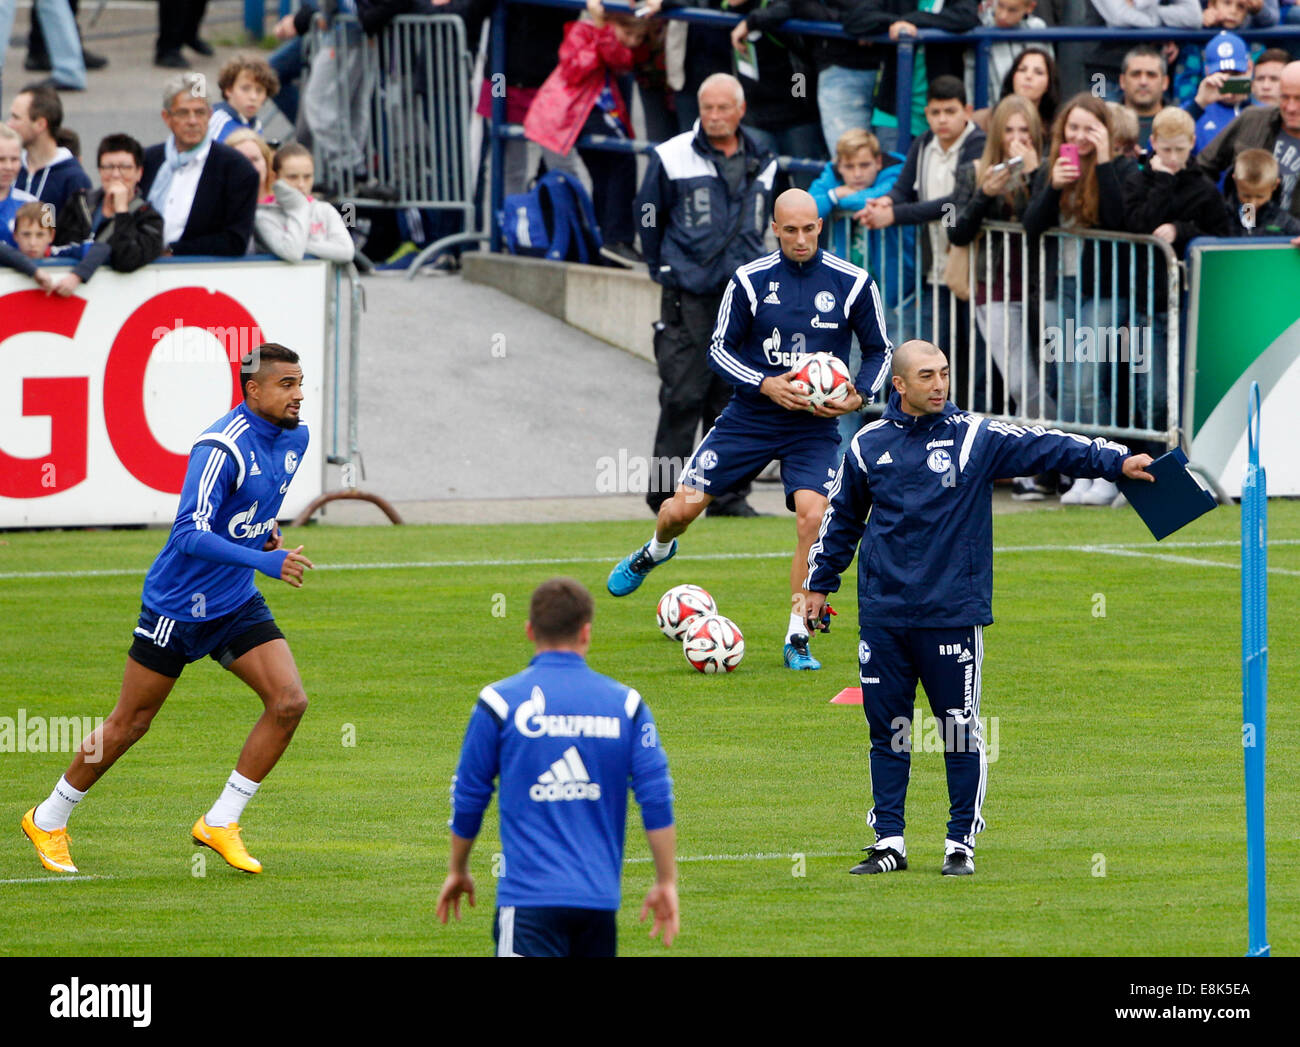 Geselnkirchen, Germany. 9th Oct, 2014. The new headcoach of German Bundesliga soccer club Schalke 04, Roberto di Matteo, leads his first training session in Geselnkirchen, Germany, 09 October 2014. Kevin-Prince Boateng (L) and assistant coach Attilio Lombardo (back) are pictured with him. Matteo takes over from Jens Keller. Photo: Roland Weihrauch/dpa/Alamy Live News Stock Photo